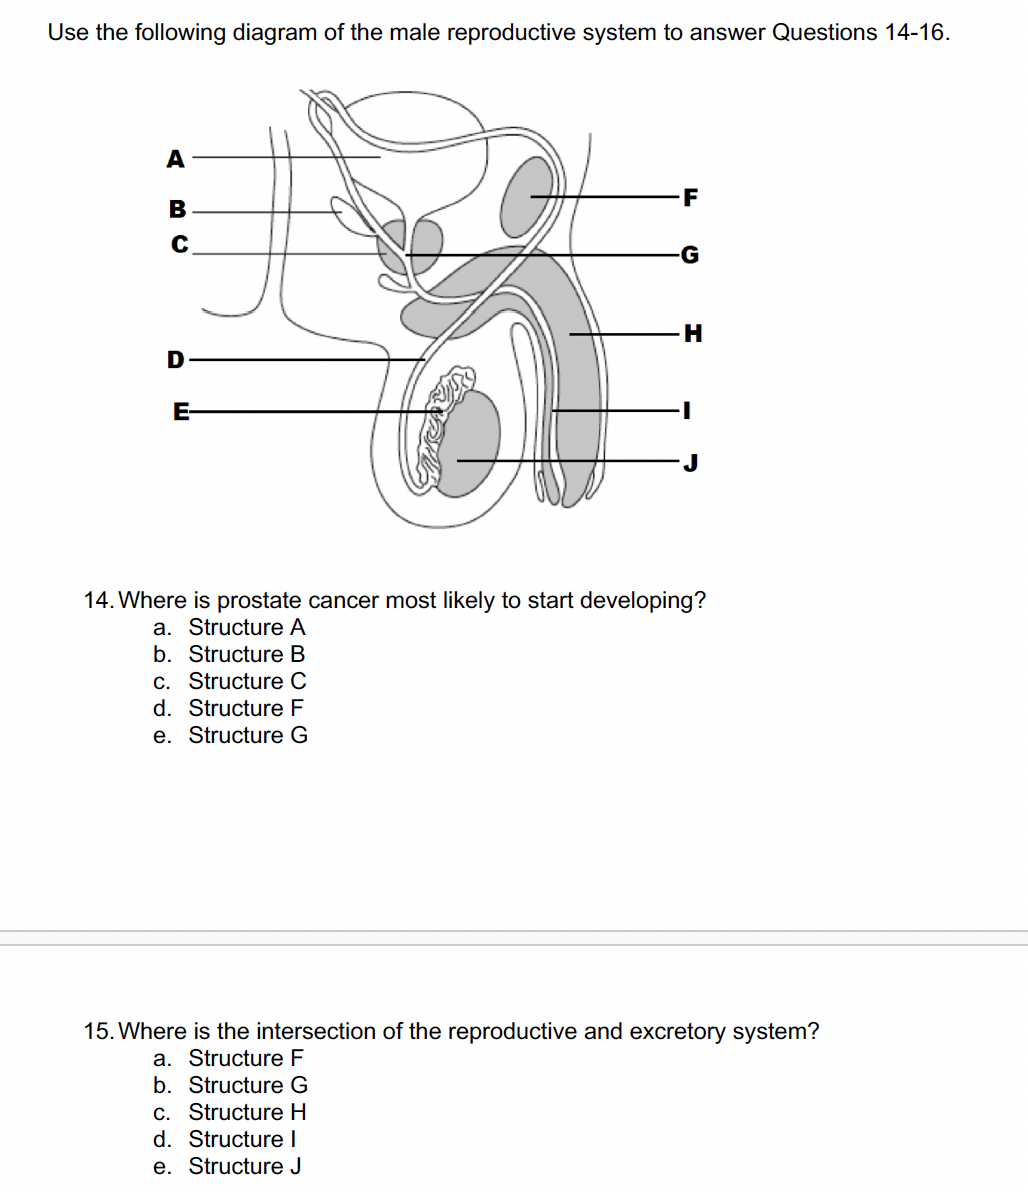 Use the following diagram of the male reproductive system to answer Questions 14-16.
A
B
C
E-
F
G
H
14. Where is prostate cancer most likely to start developing?
a. Structure A
b. Structure B
c. Structure C
d. Structure F
e. Structure G
15. Where is the intersection of the reproductive and excretory system?
a. Structure F
b. Structure G
Structure H
c.
d. Structure I
e. Structure J